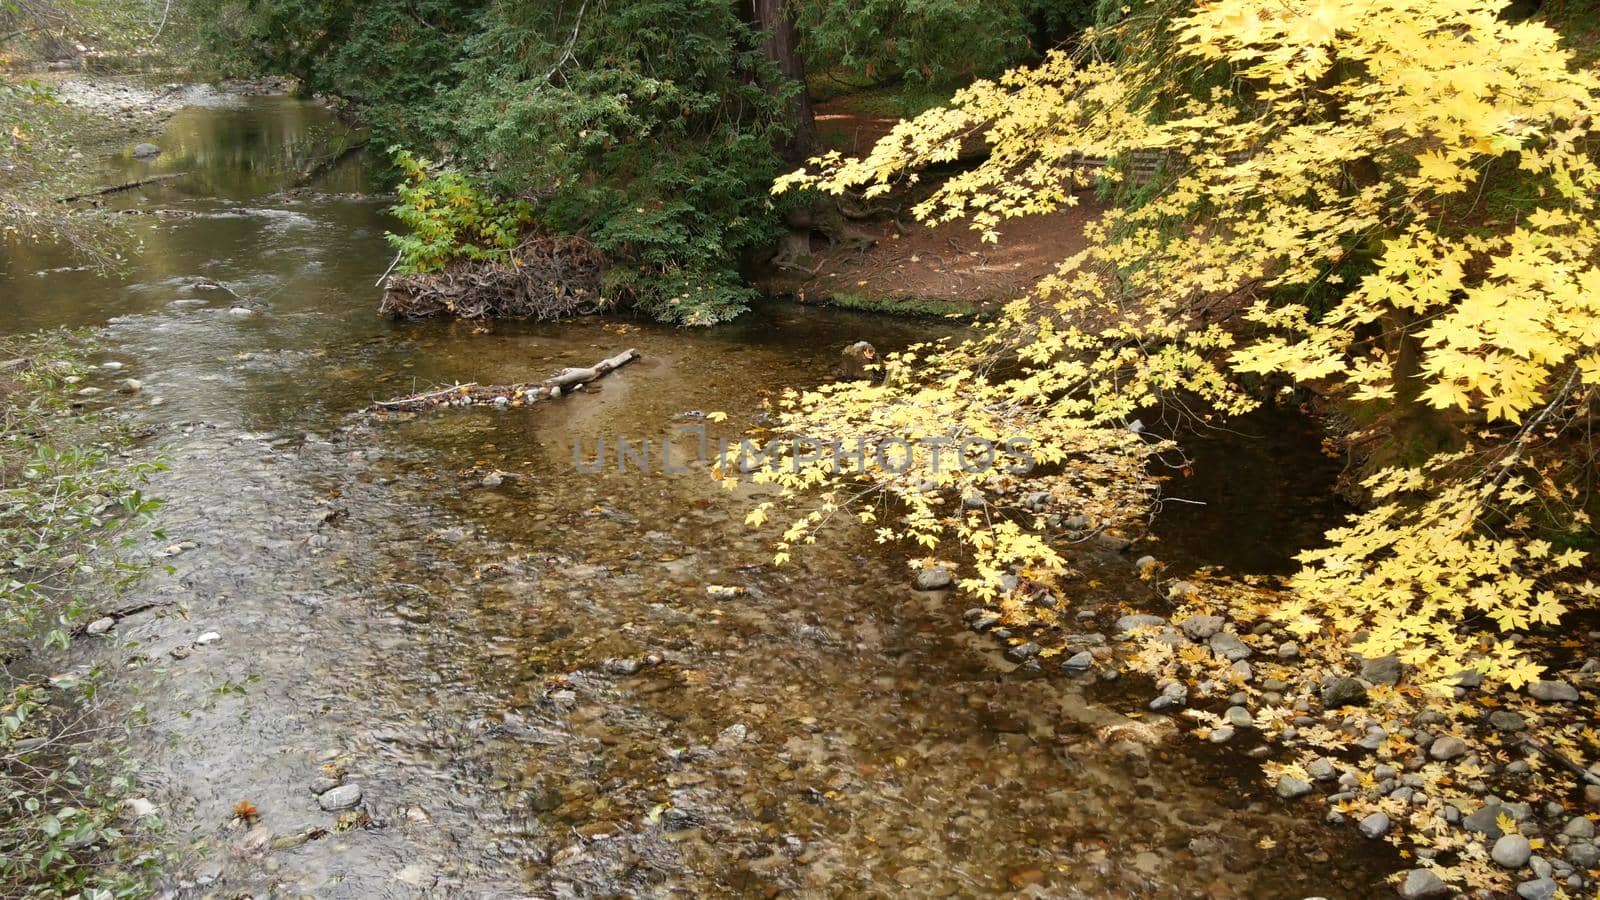 Big Sur River flowing, autumn fall forest, woodland or grove. Eco tourism trail , hiking or trekking in wood, California nature, USA. Rocky creek, pebble stones, stream water, yellow maple tree leaves